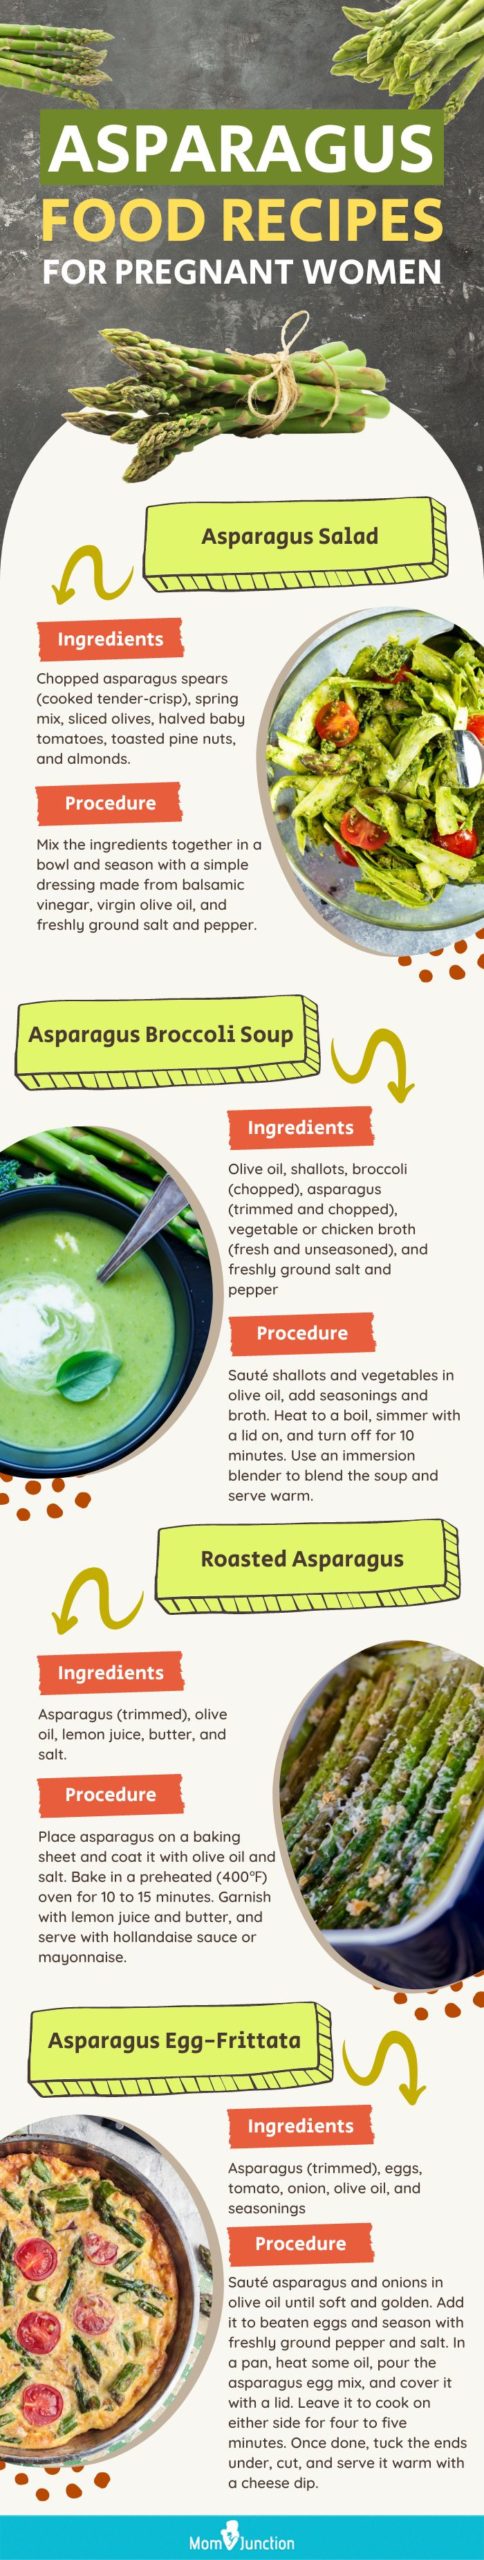 asparagus food recipes for pregnant women (infographic)